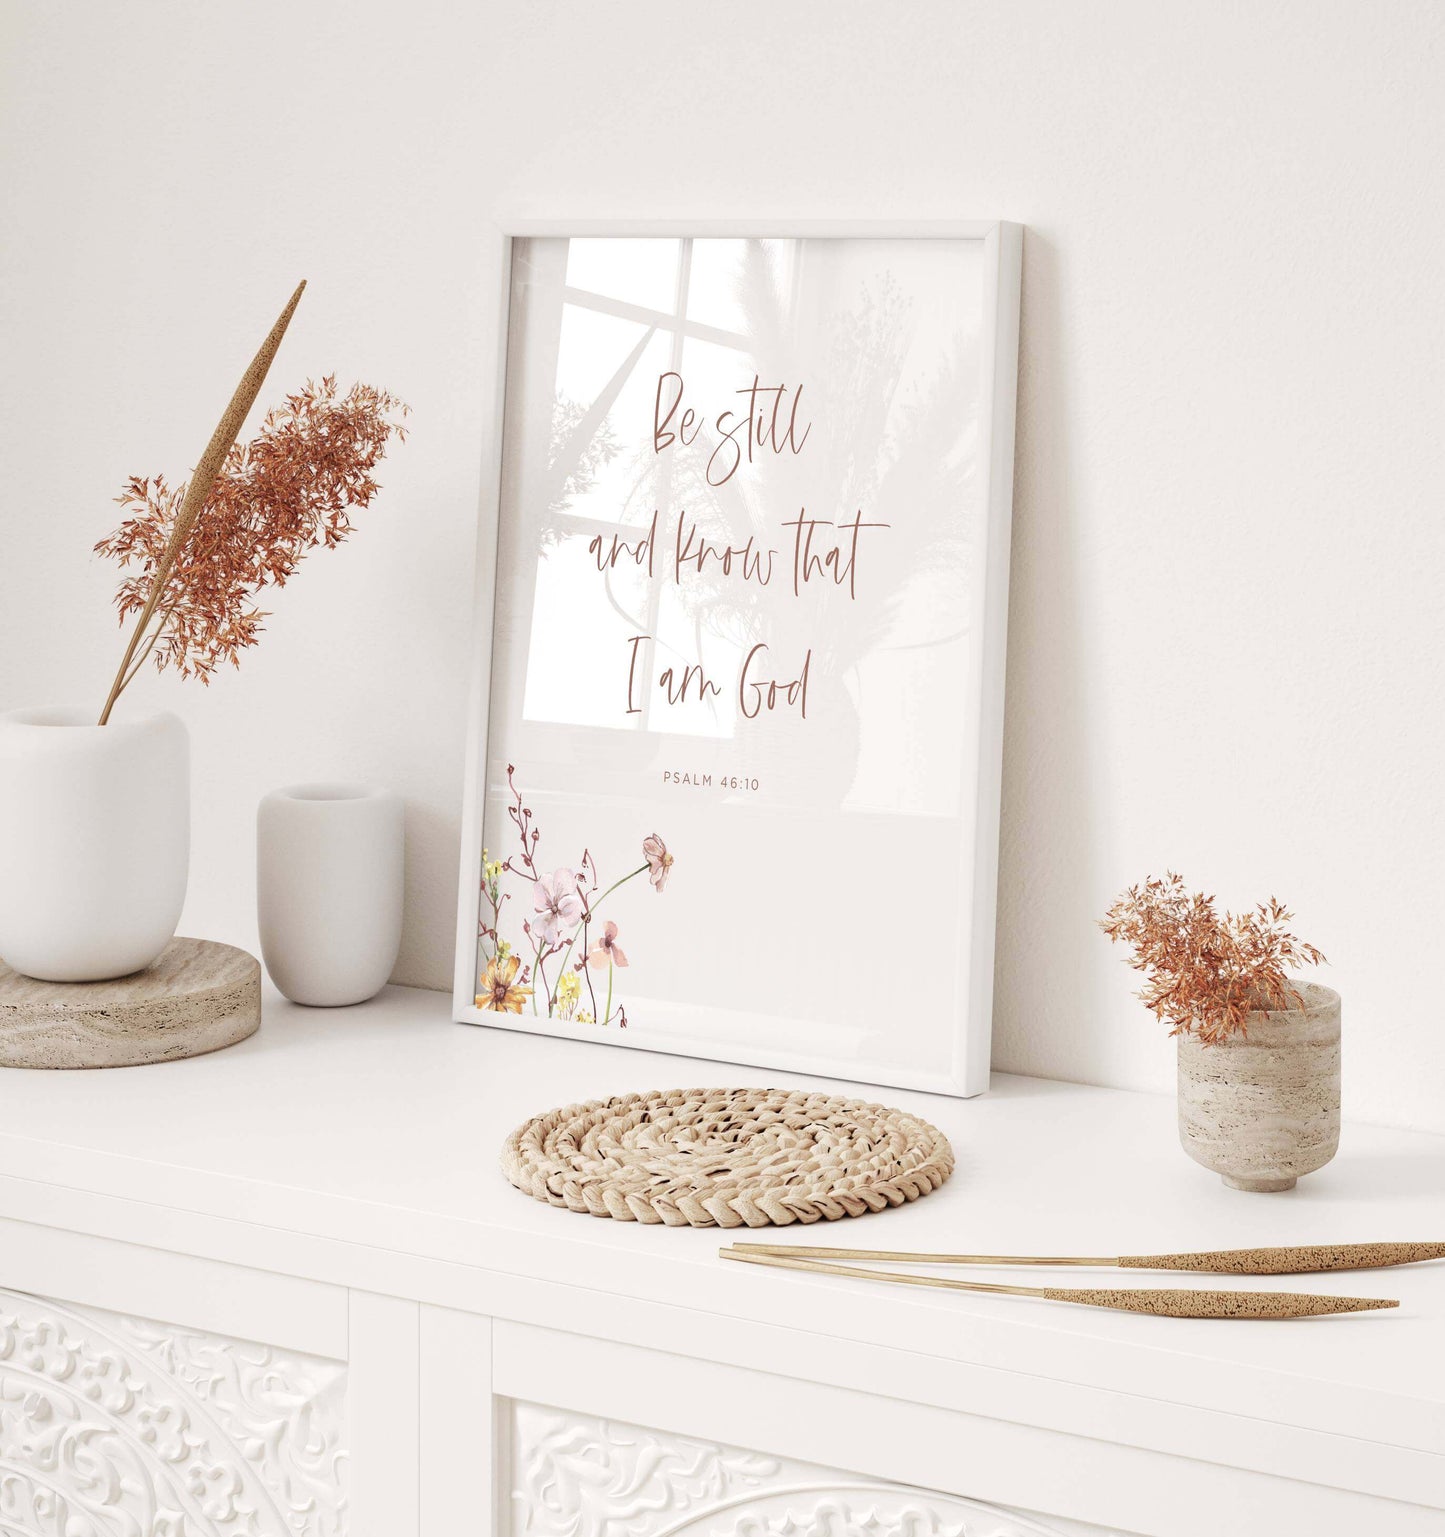 Psalm 46:10 wall art with wildflowers on a desk